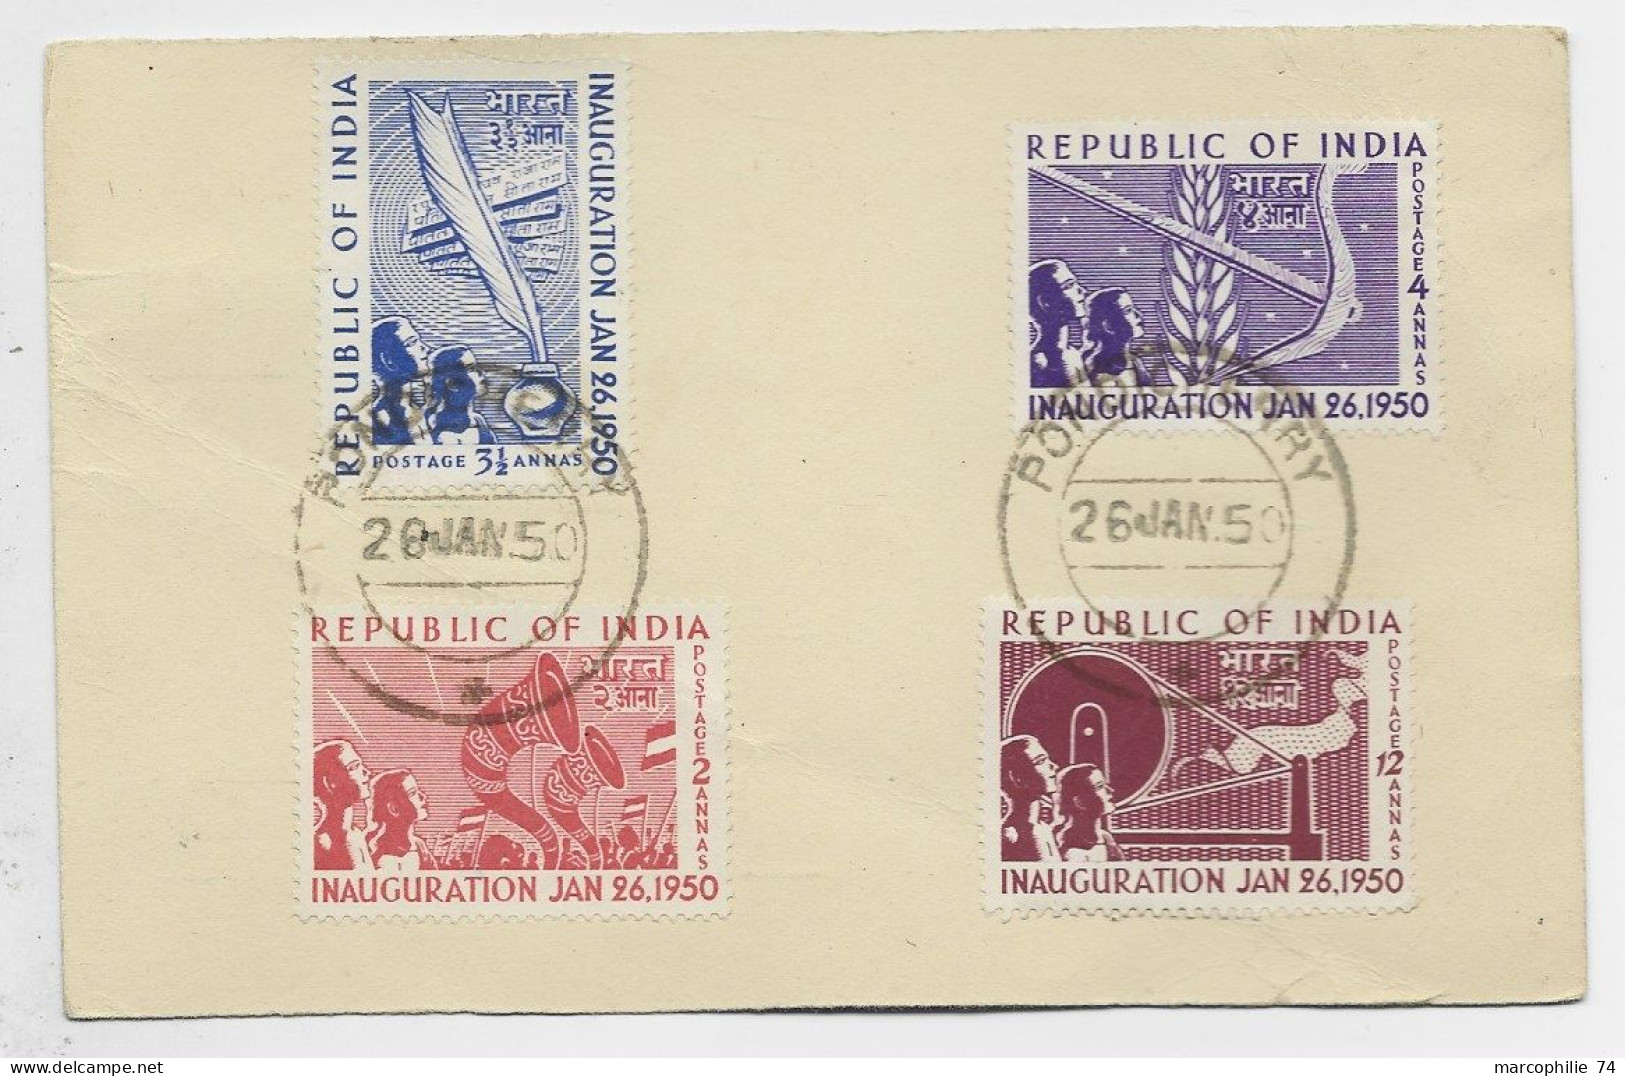 INDIA ENTIER POST CARD 9PS AIRAMAIL PONDICHERY + VERSO INAUGURATION OF INDIA 1950 TO FRANCE - Briefe U. Dokumente